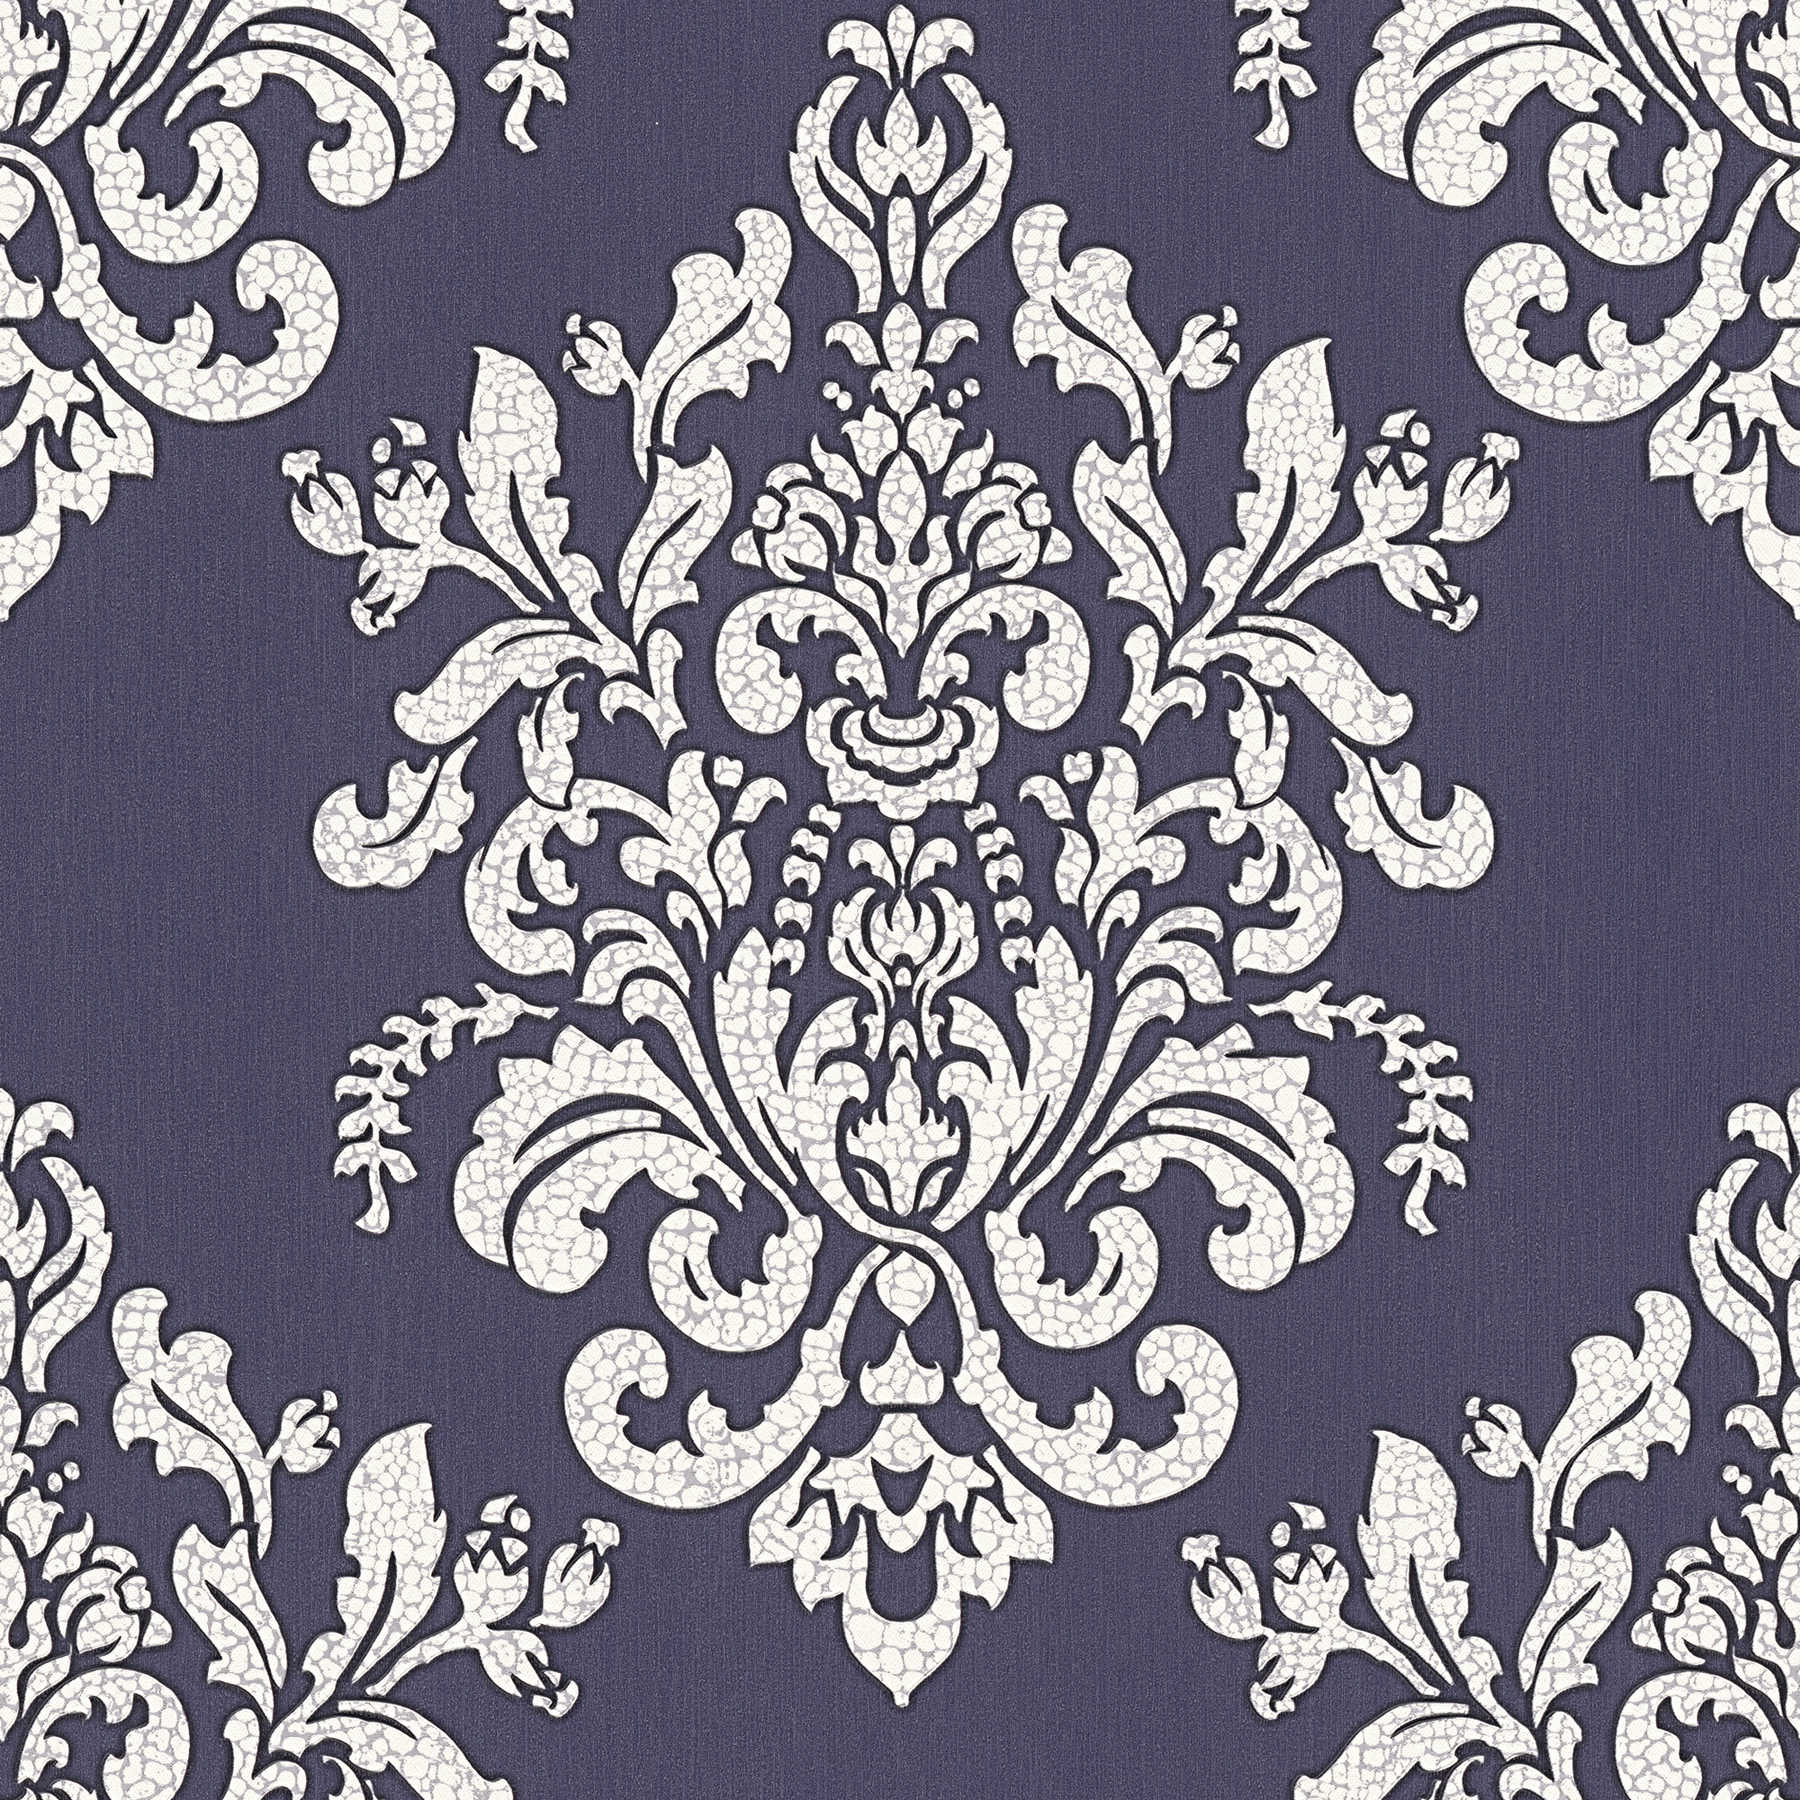 Ornament wallpaper with crackle effect - metallic, purple
